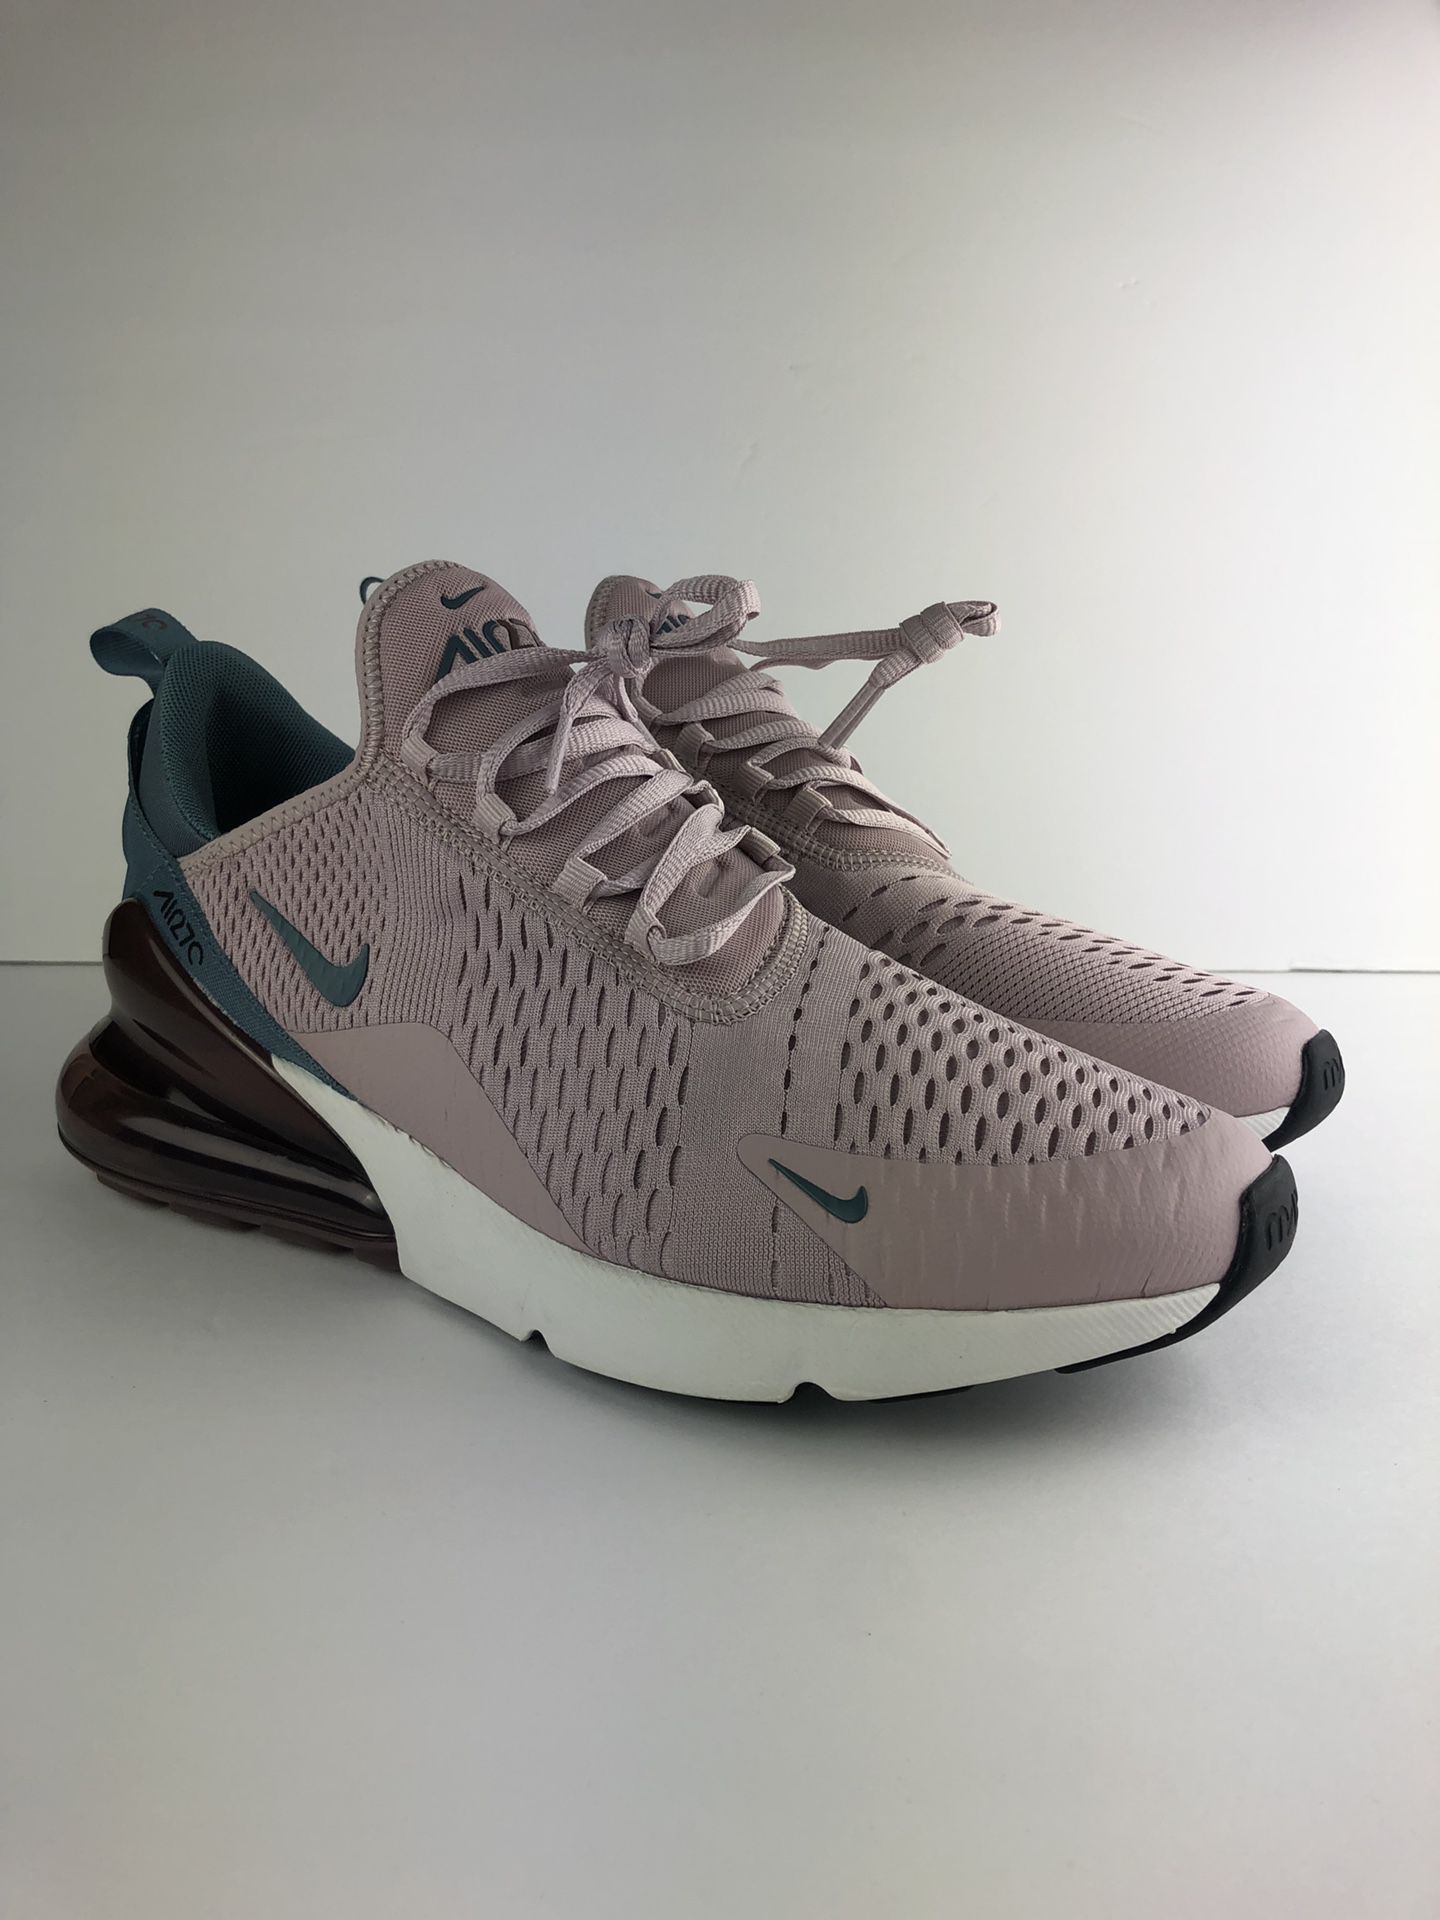 NIKE AIR MAX 270 PARTICLE ROSE CELESTIAL TEAL WOMENS SIZE 12AH6789-602 for  Sale in Highland, CA - OfferUp